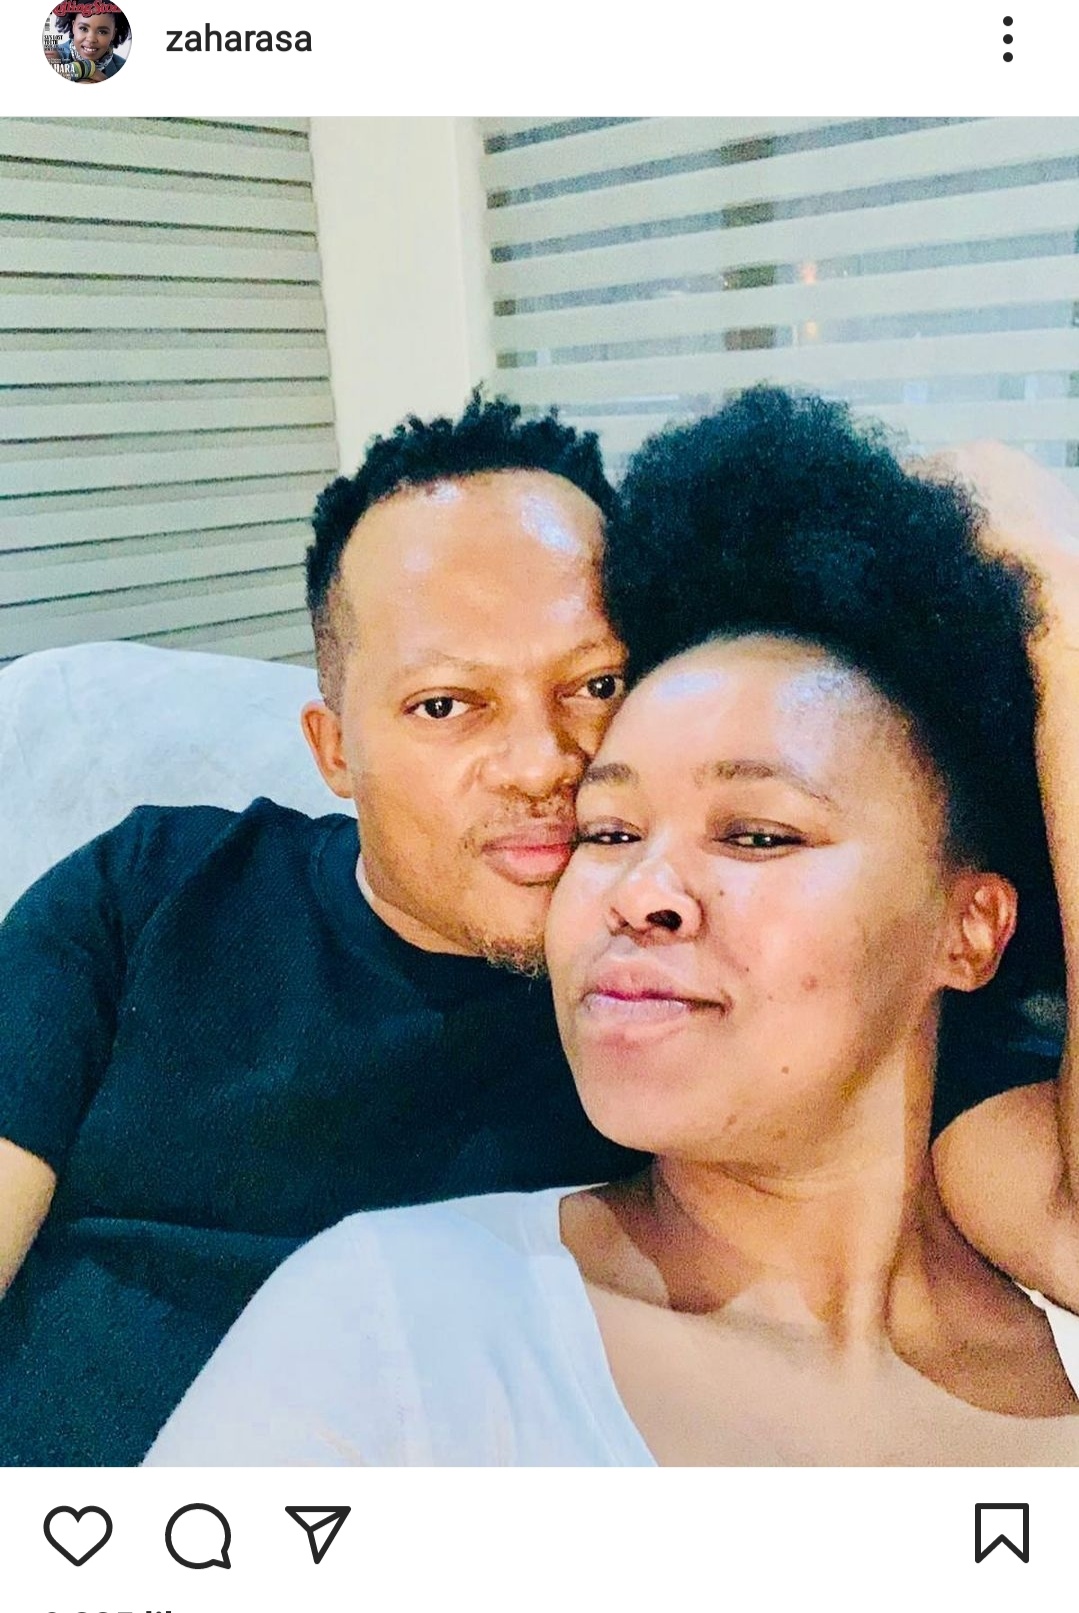 Pregnant Zahara Ties The Knot| Here's What We Know About Her Husband